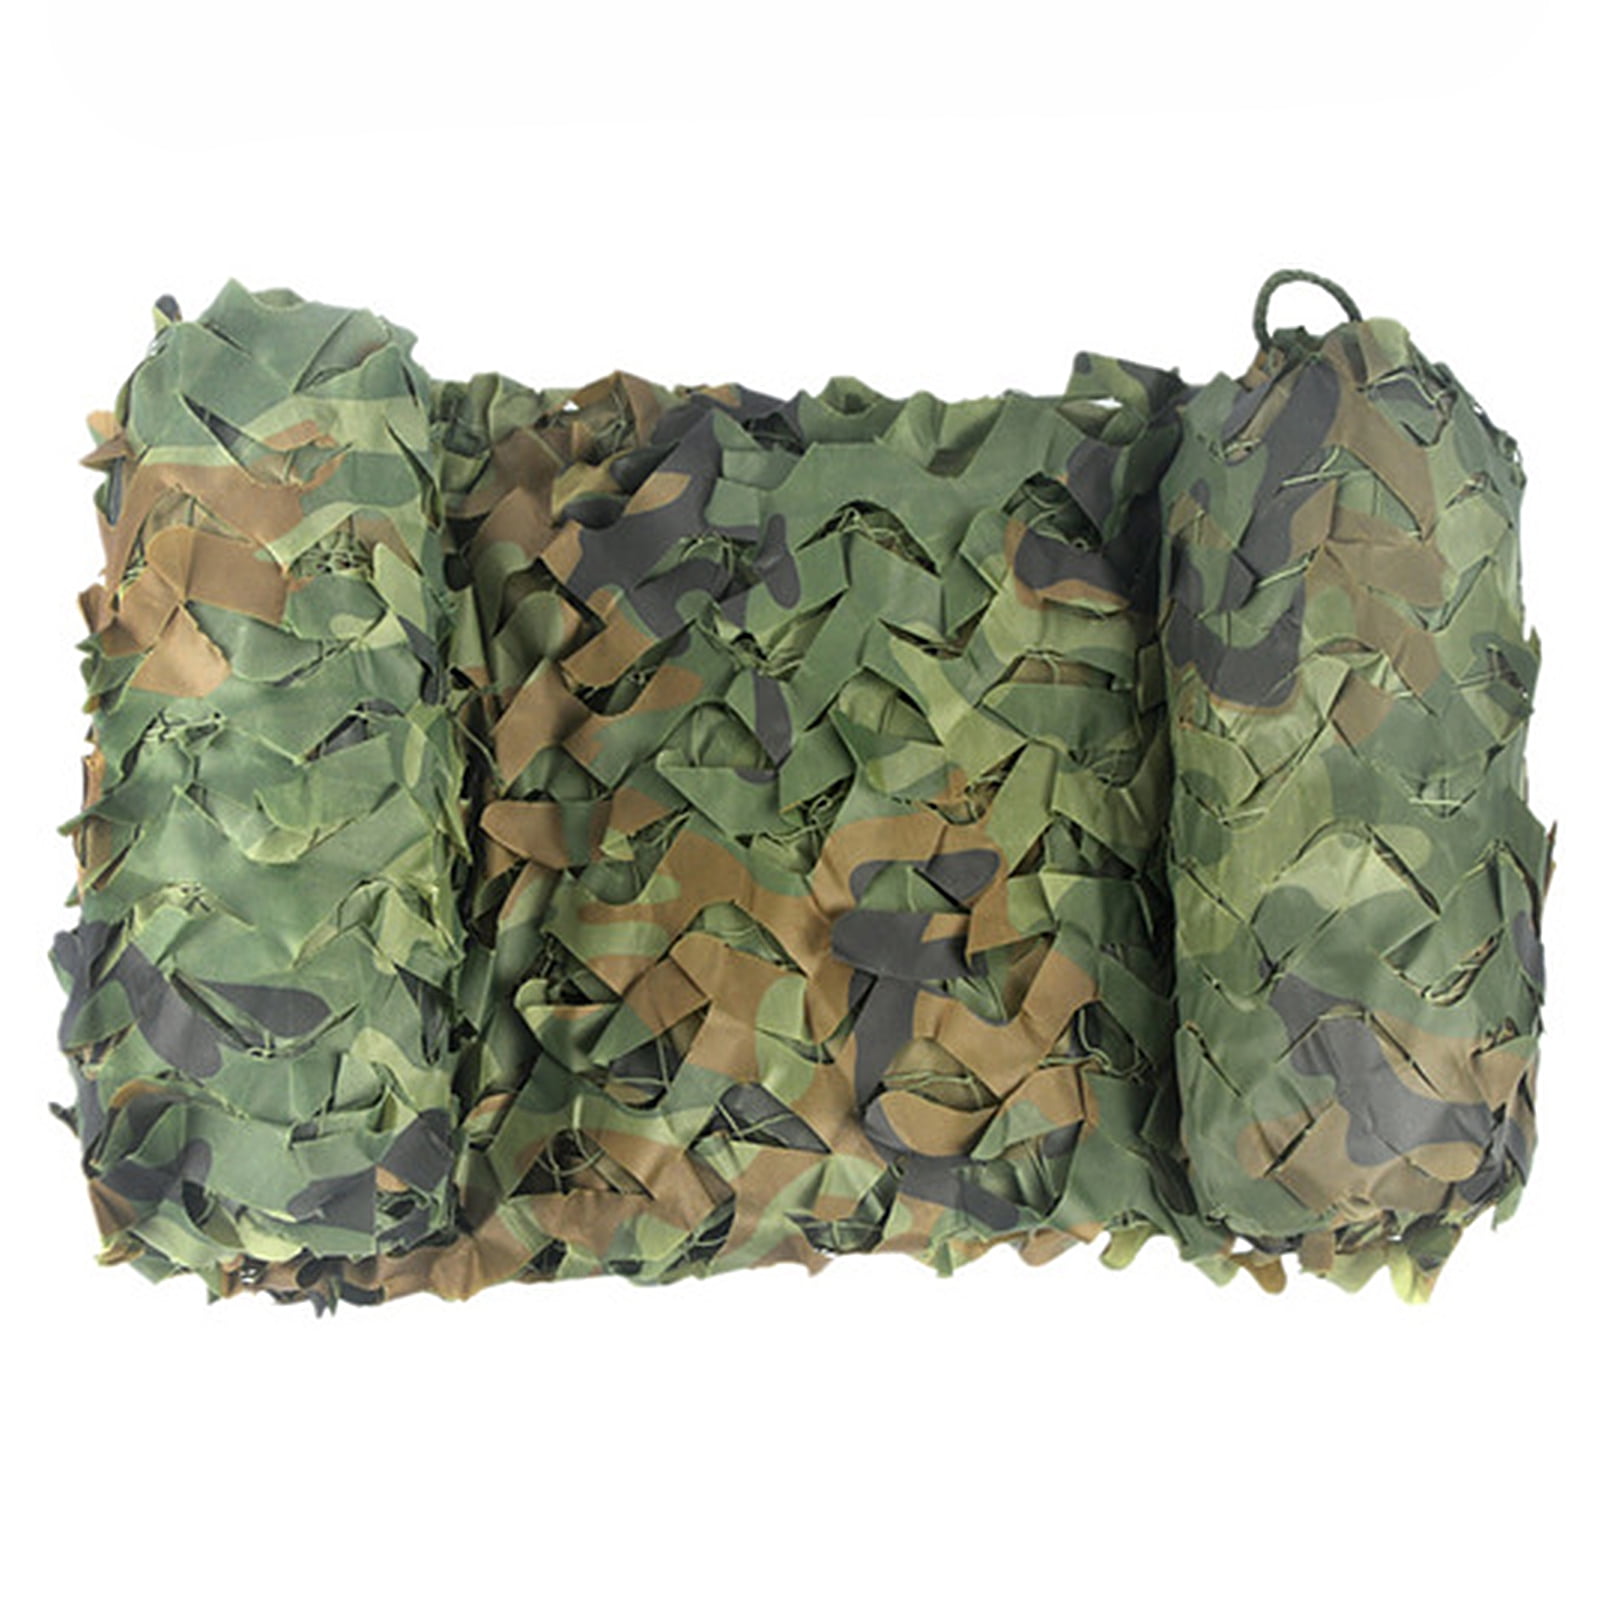 300D Mesh Fabric Cloth Camouflage Netting Awning Cover Shade Net DIY Decoration